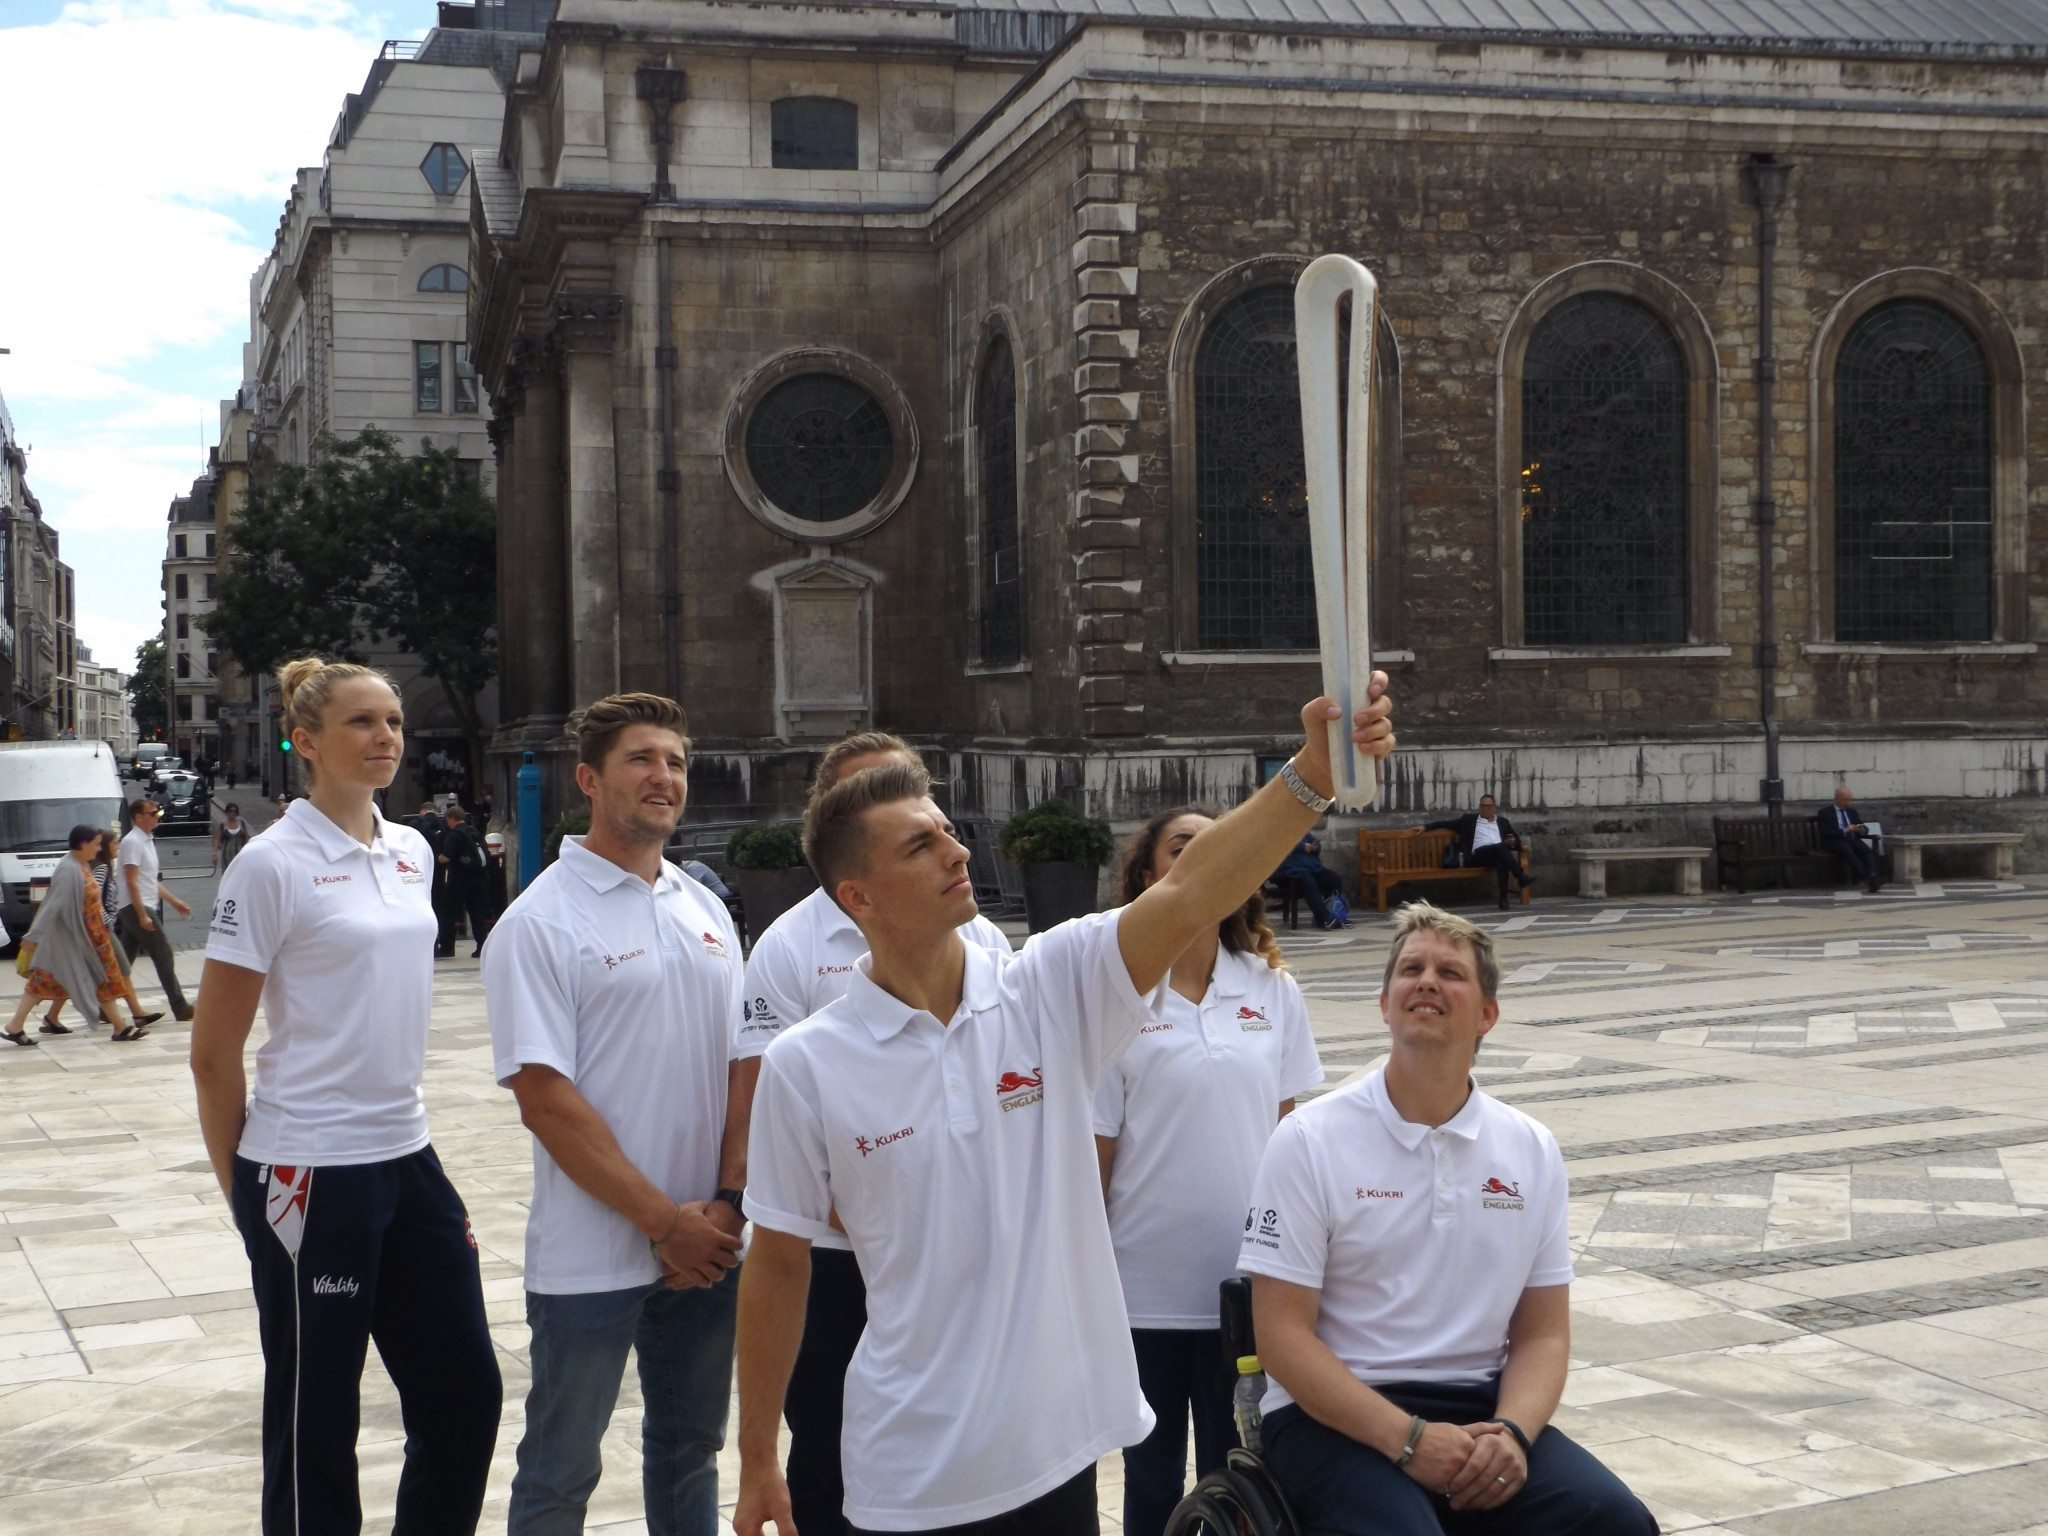 Max Whitlock surrounded by other England team members ©Philip Barker